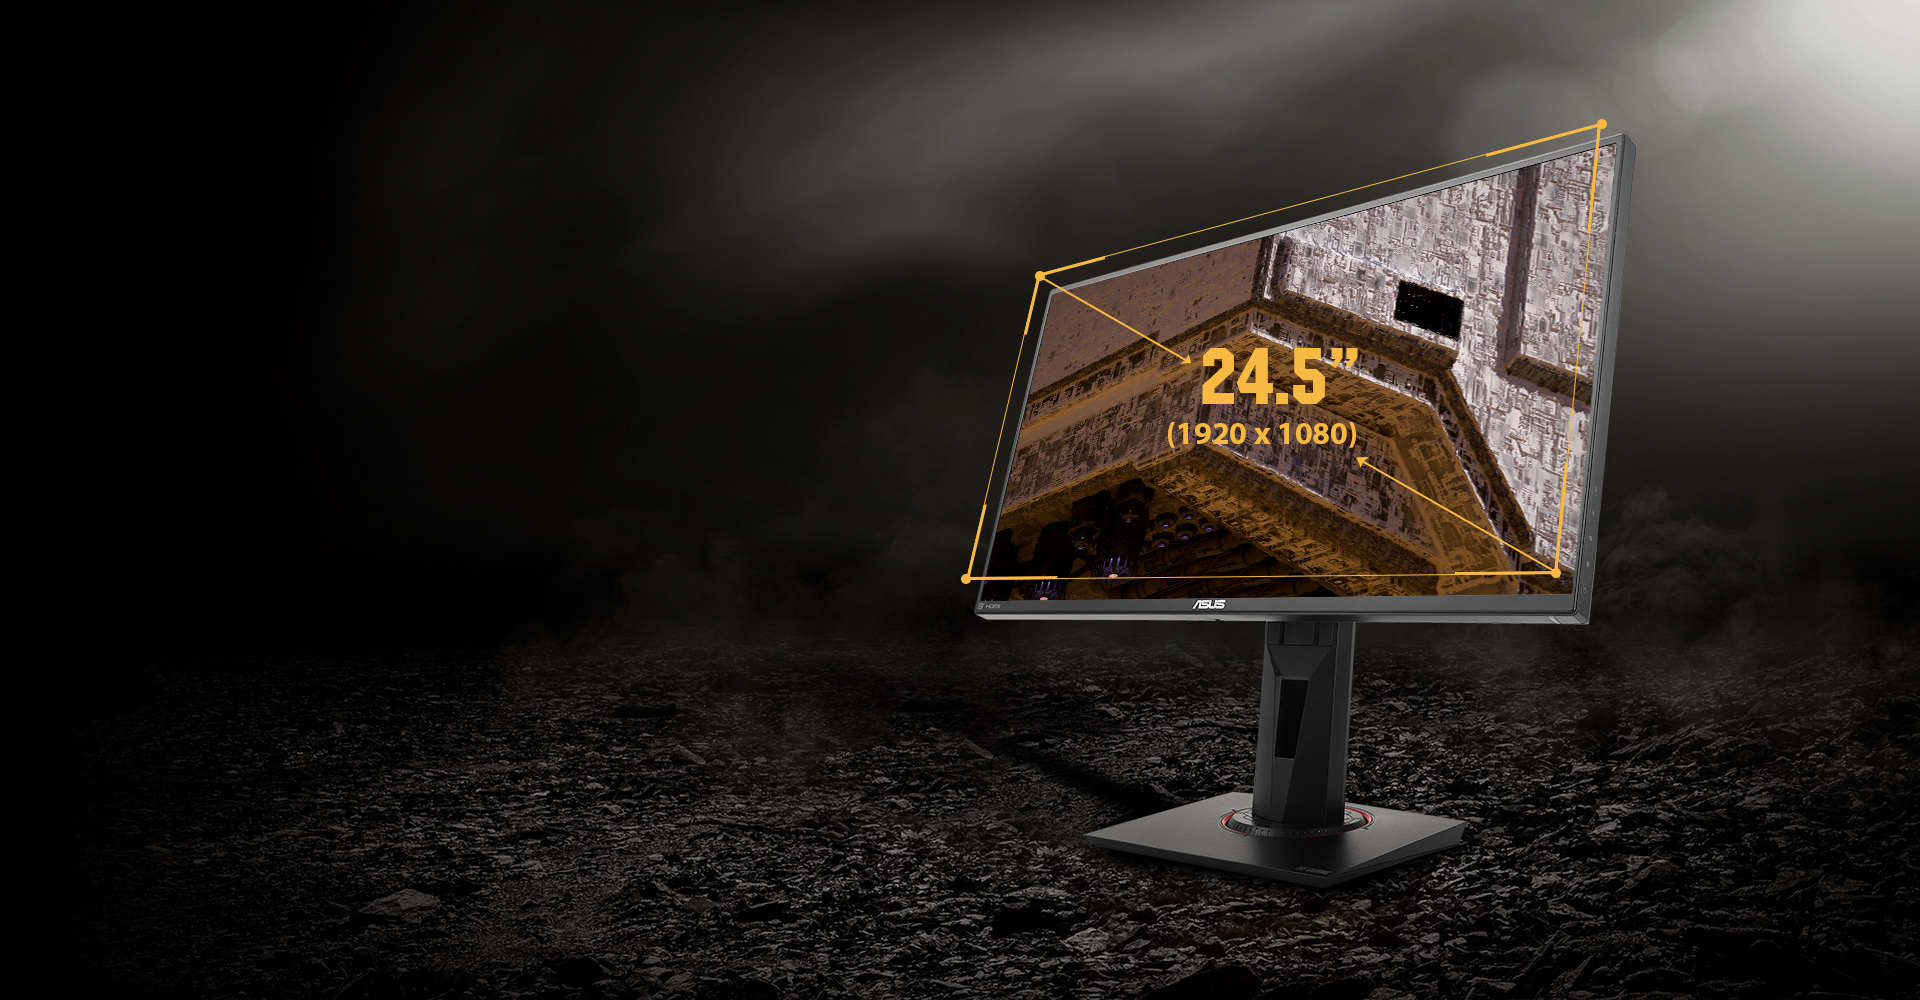 the ASUS monitor facing left showing the screen size is 35-inch